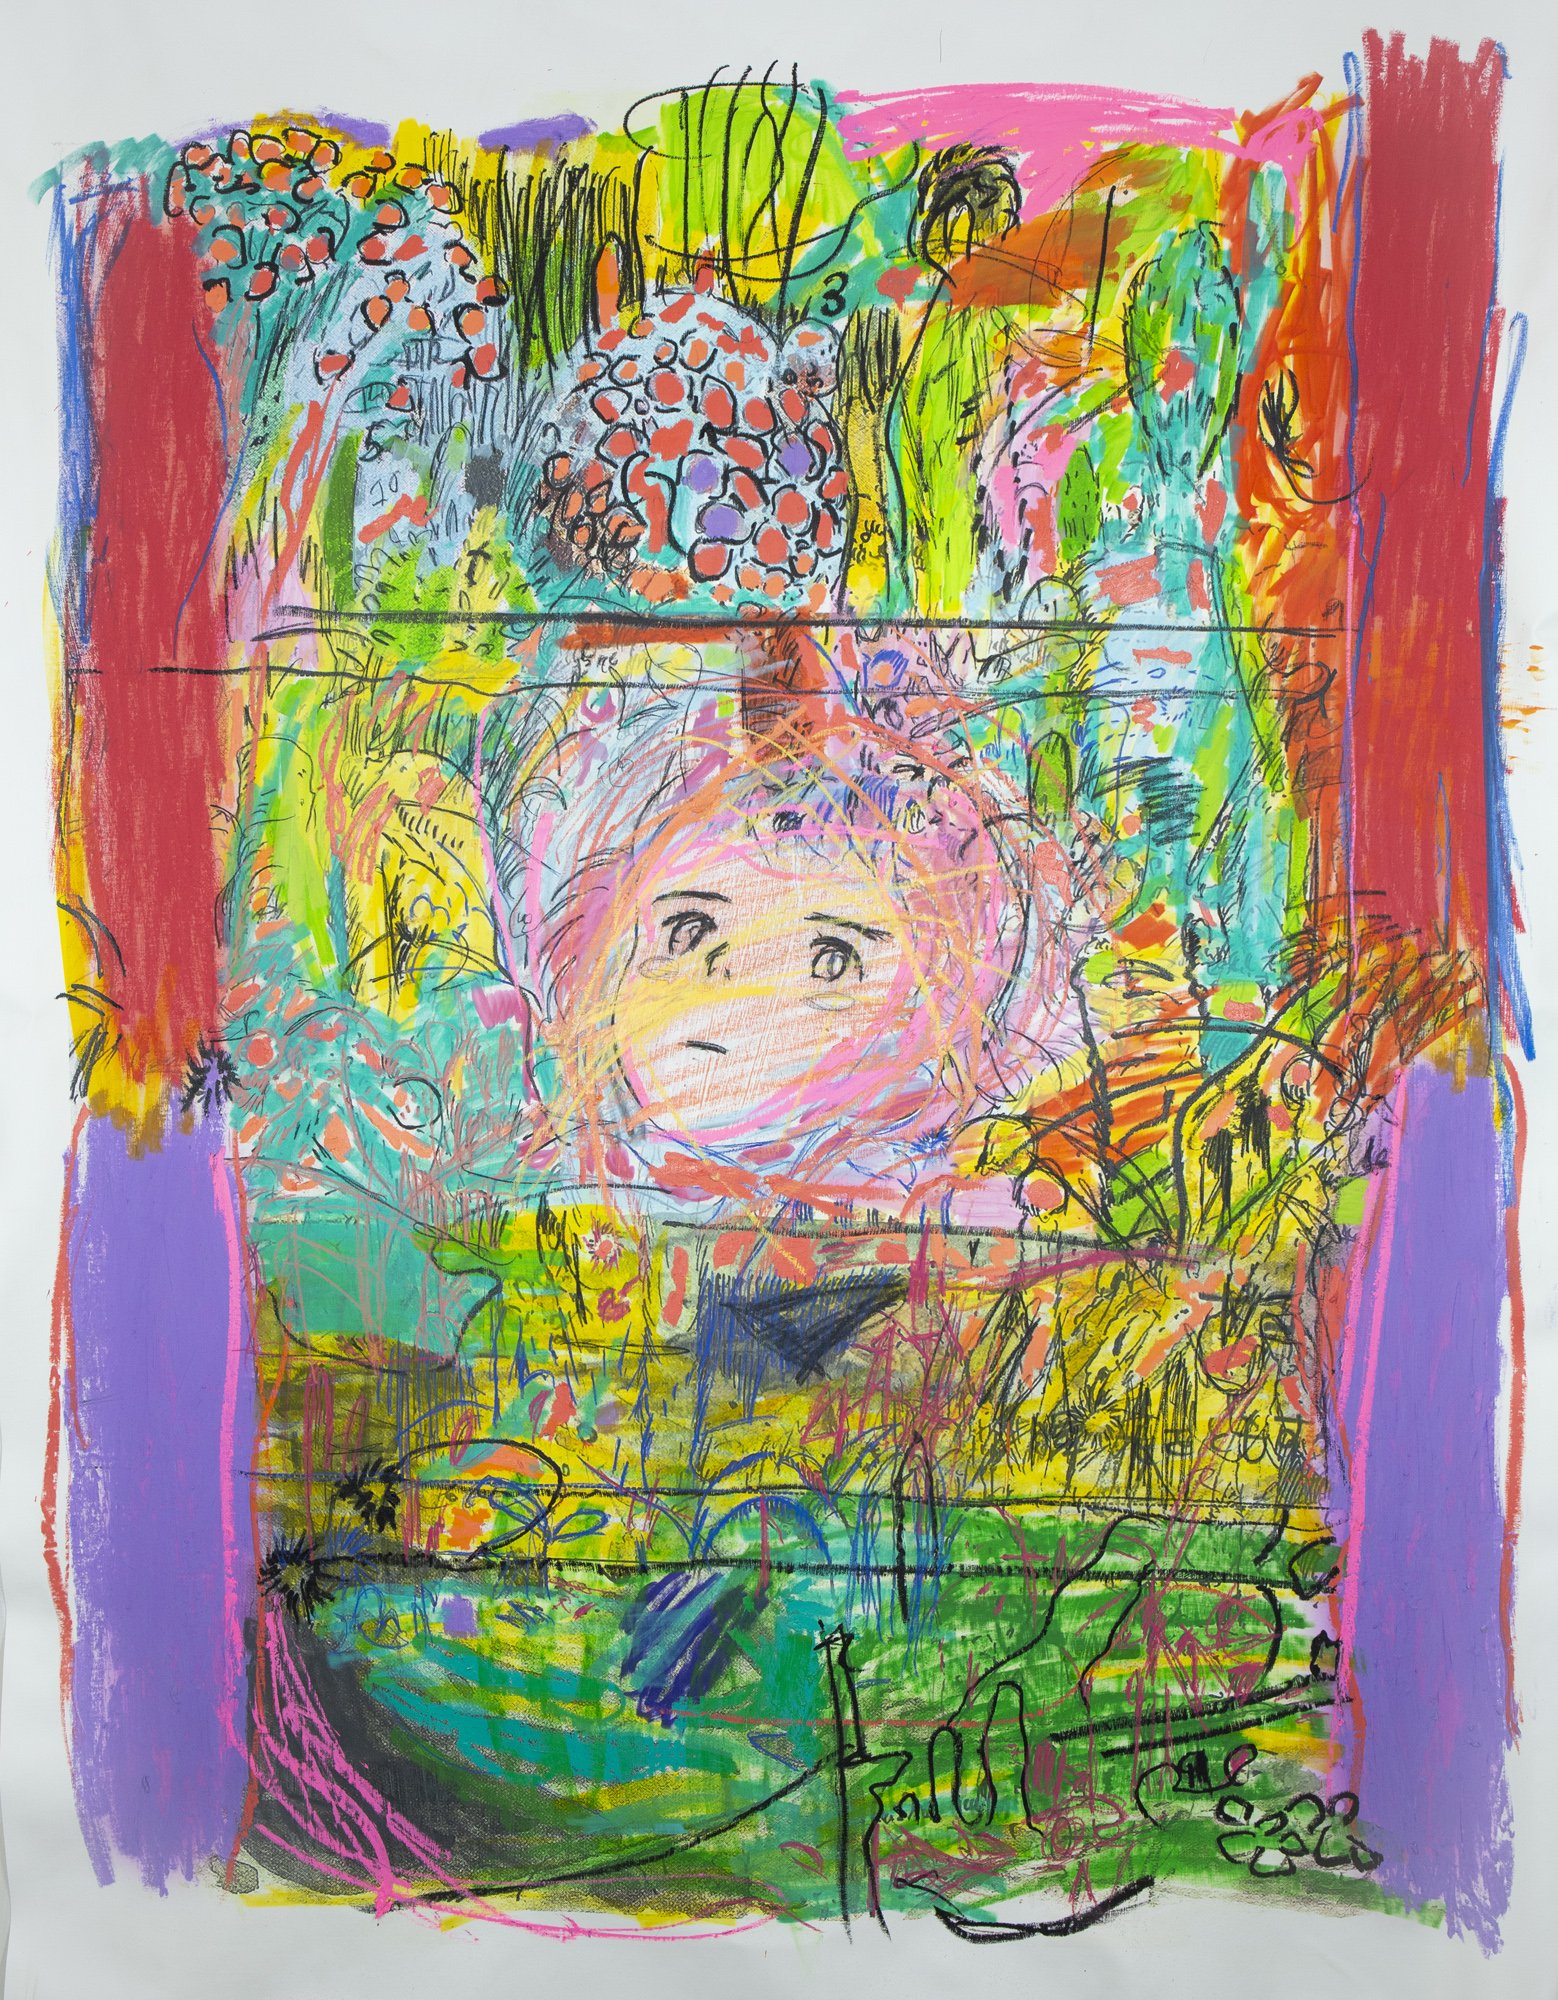  Child at 3  58” x 72”  Oil, acrylic, color pencil, photograph on canvas 